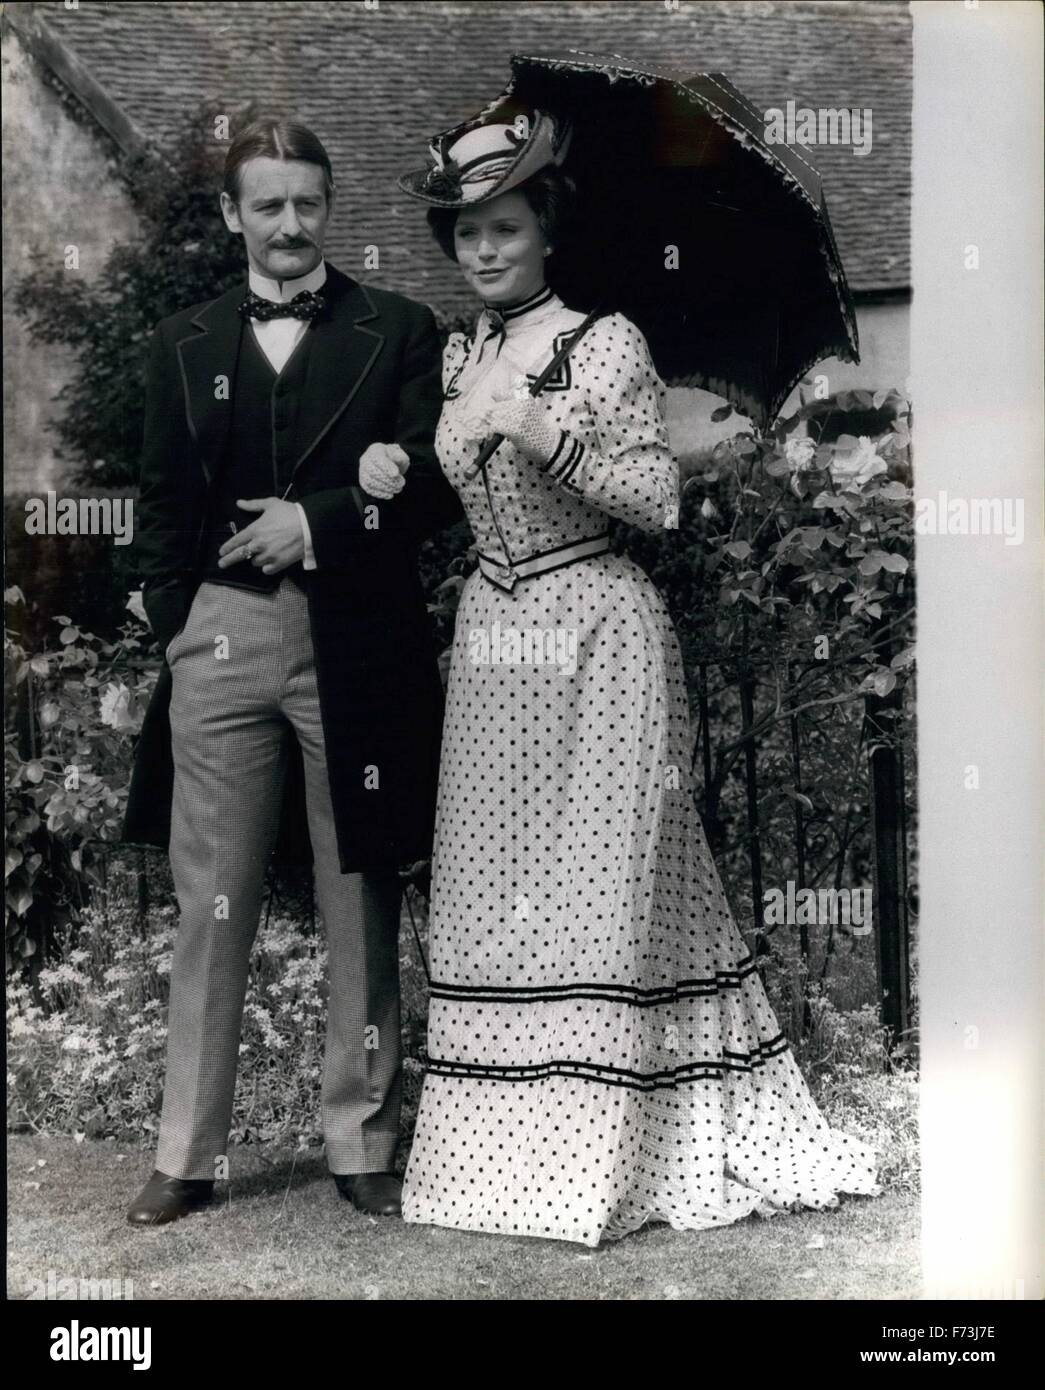 1968 - Lee Remick as Lady Randolph Churchill with her first husband Lord Randolph Churchill, played by Ronald Pickup. Although this was taken at Salisbury Hall, Jennie did not move there until after her marriage to George Cornwalliz-West, and Ronald Pickup will not be seen in the sequences filmed there. © Keystone Pictures USA/ZUMAPRESS.com/Alamy Live News Stock Photo